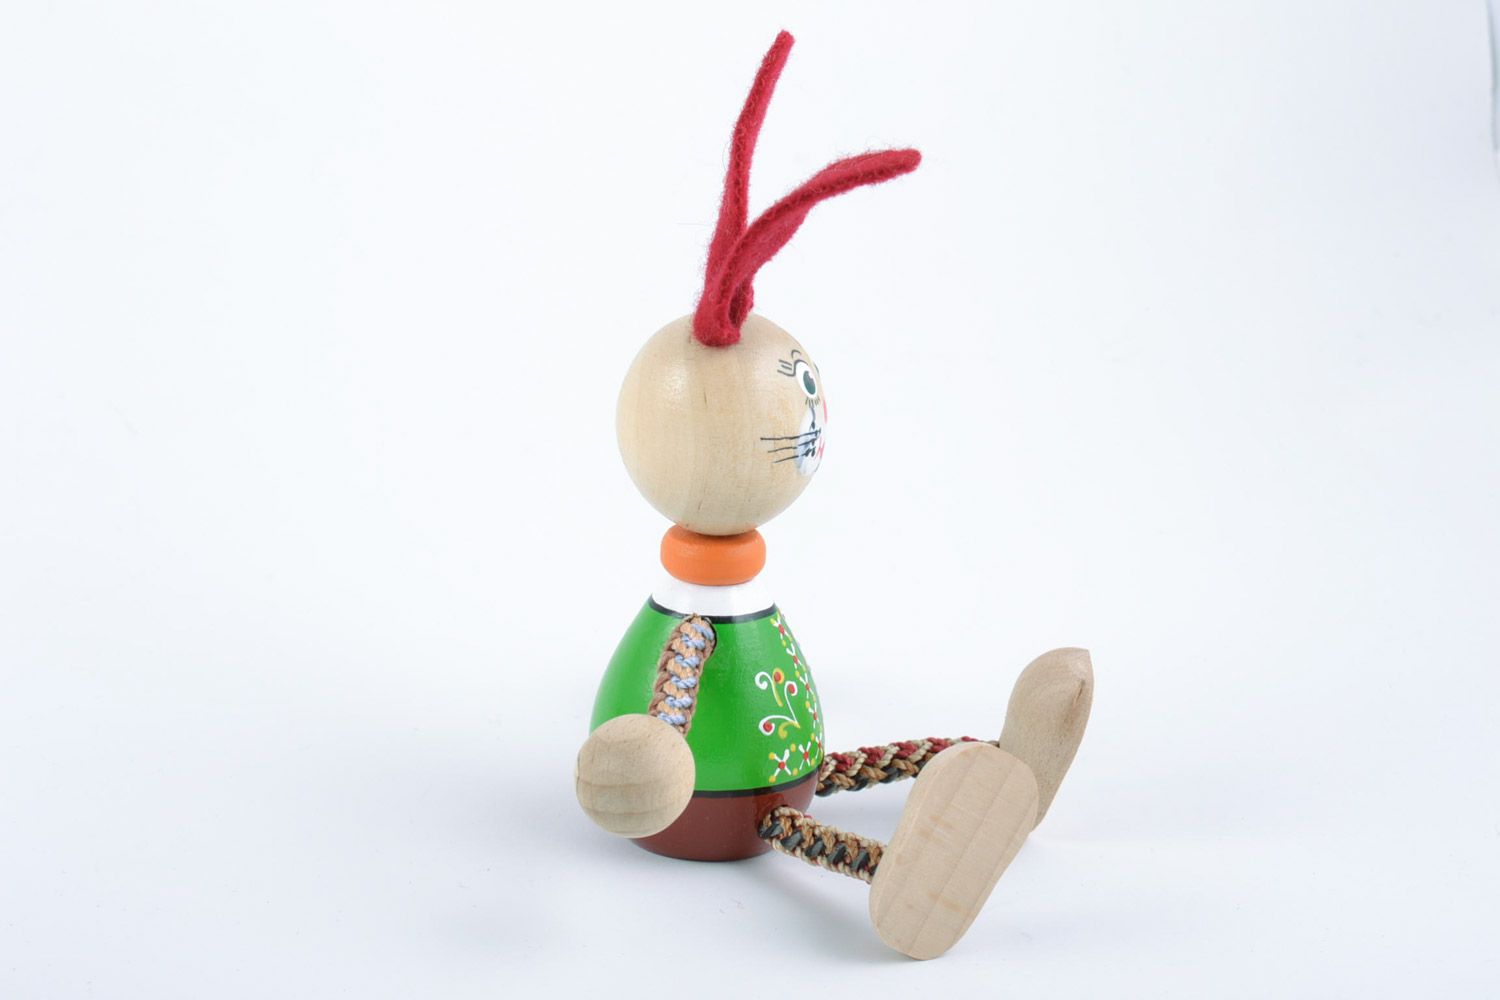 Painted eco friendly wooden homemade eco toy rabbit with red ears for children photo 4